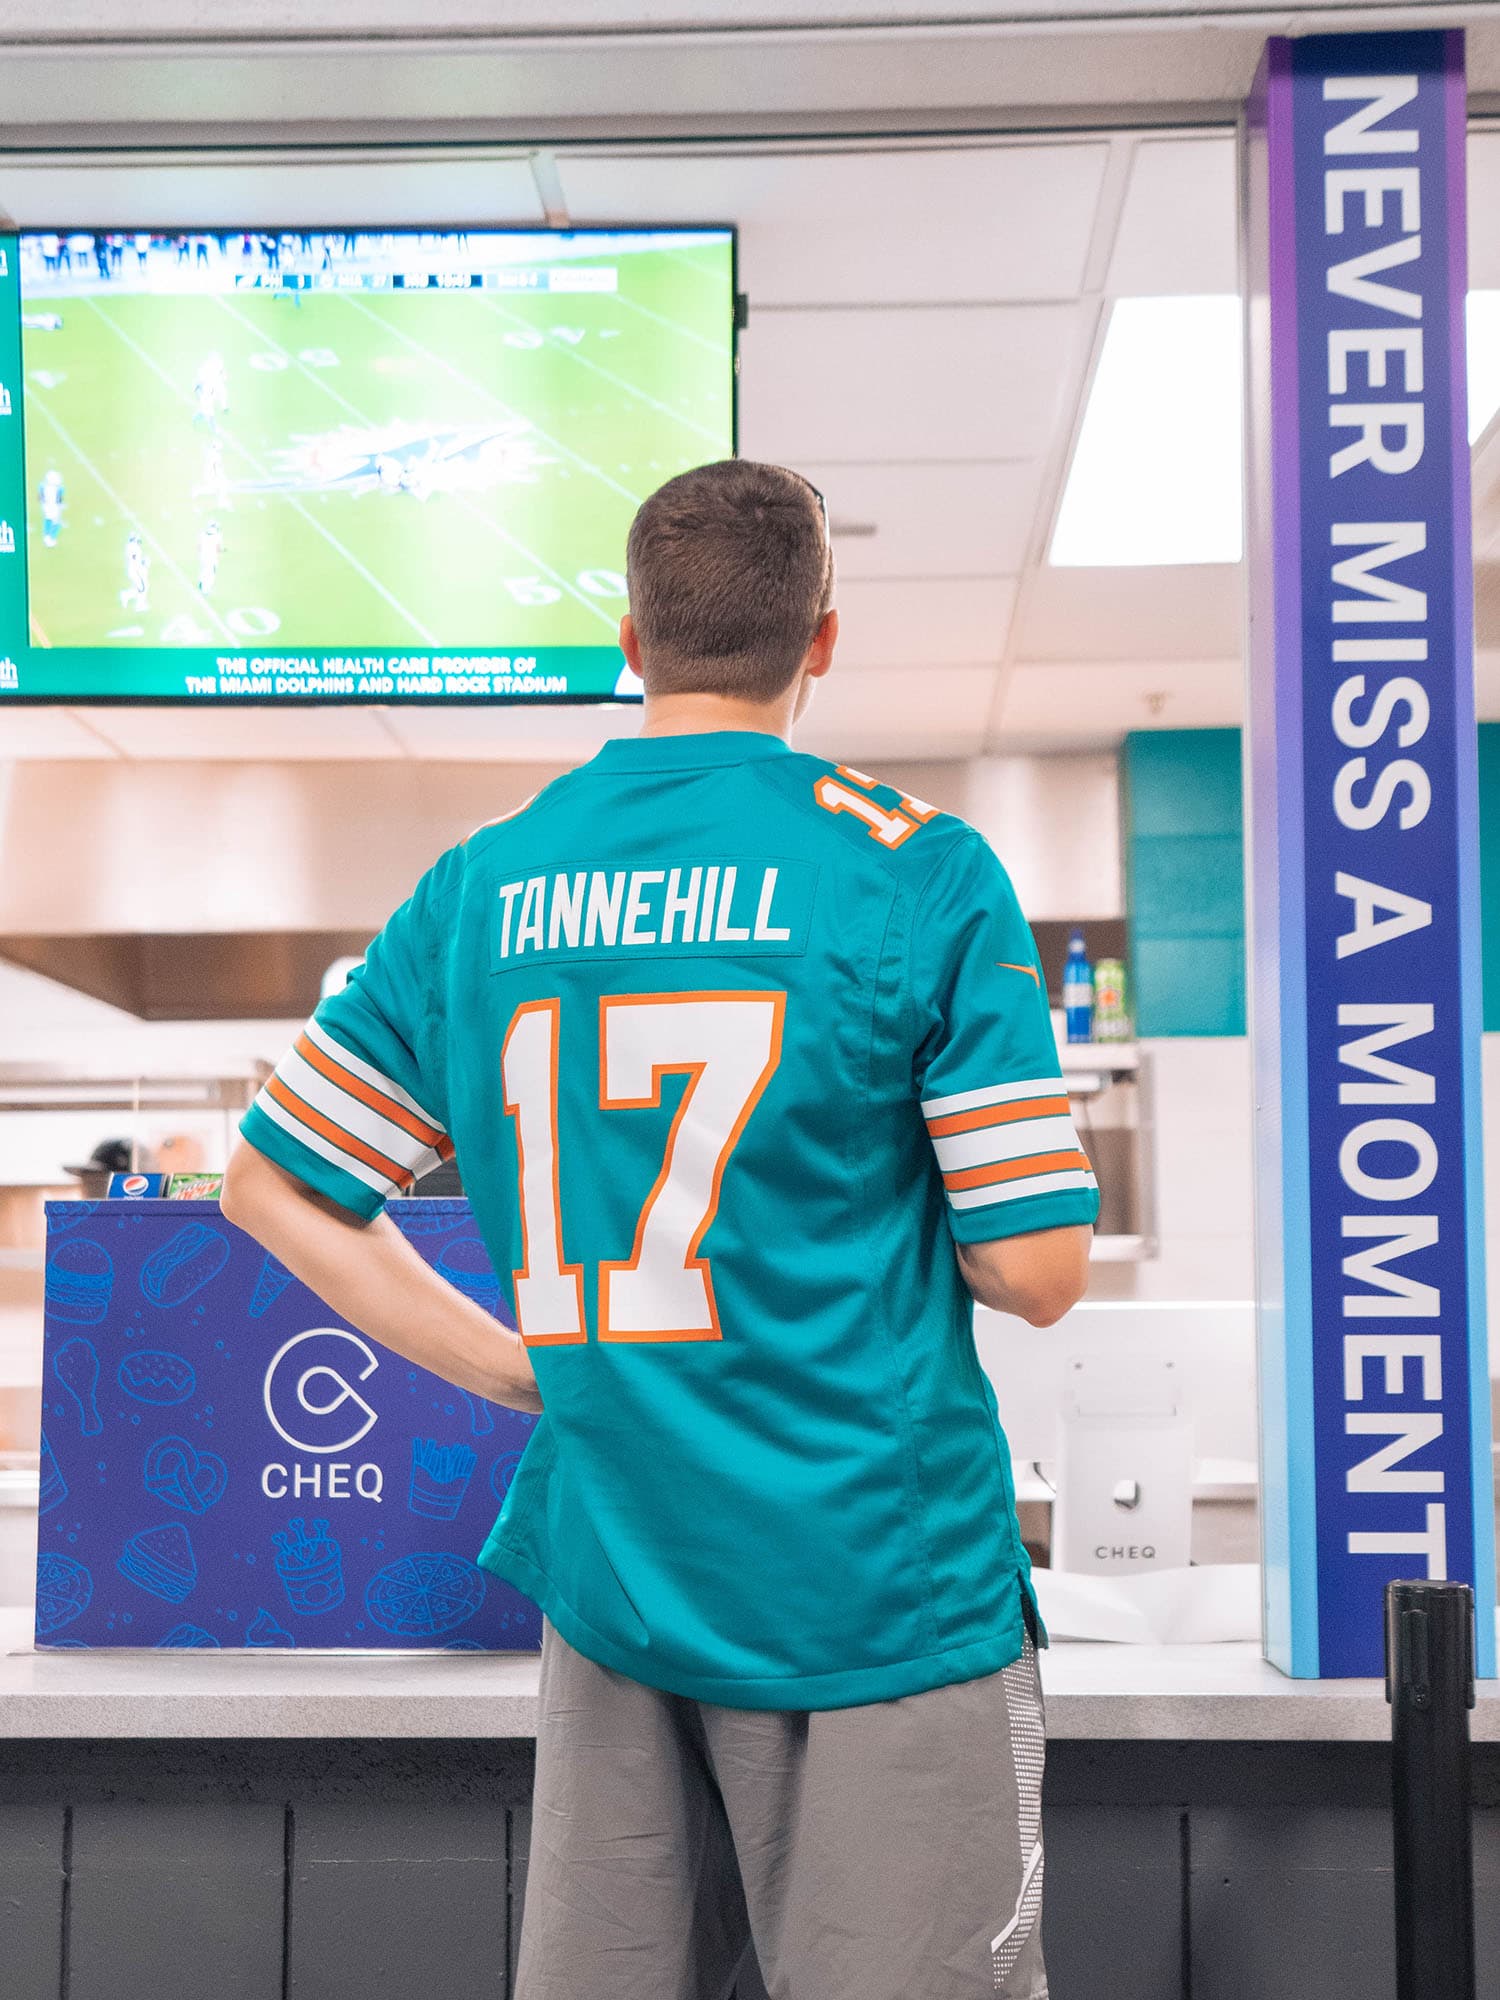 Miami Dolphin’s fan wearing a Tannehill jersey watching the game on a TV while waiting for his order.